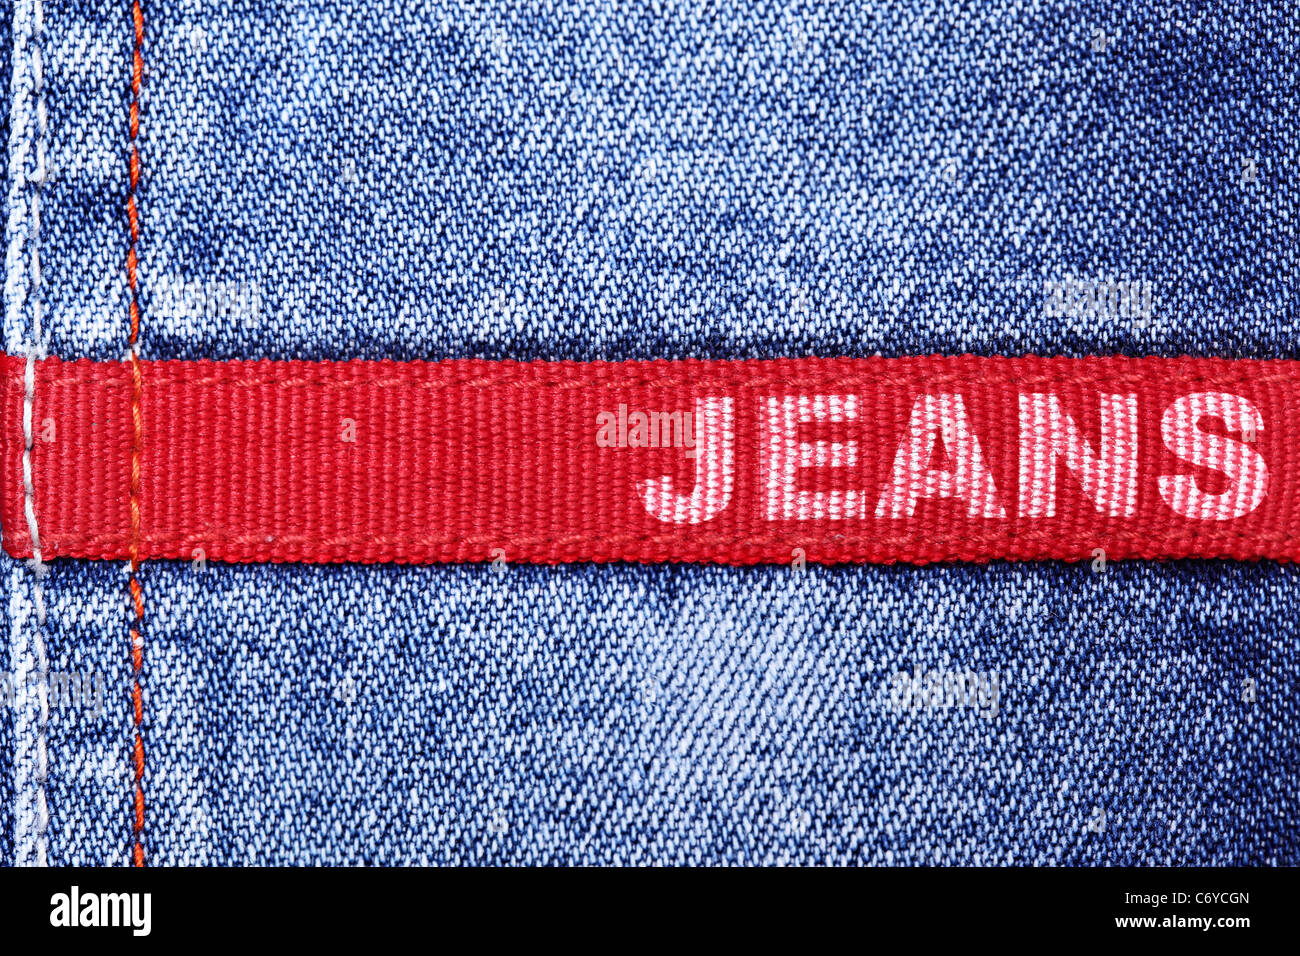 Blue jeans and red label with word 